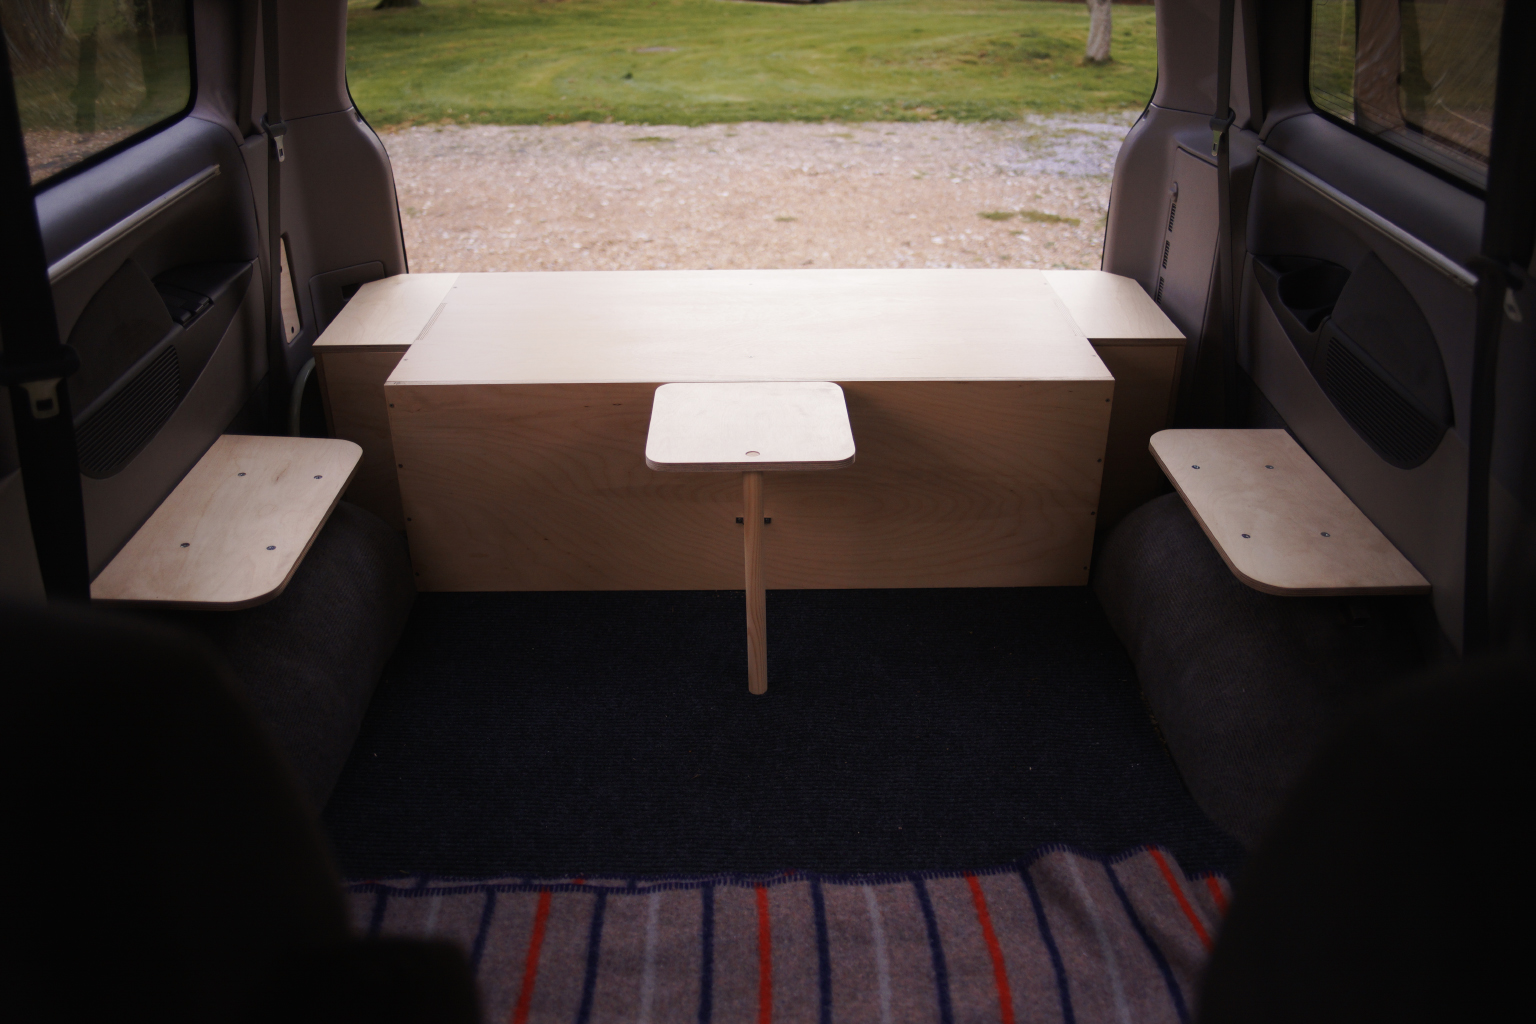  Inside the van, wheel arch mounted seats and the small folding table. 